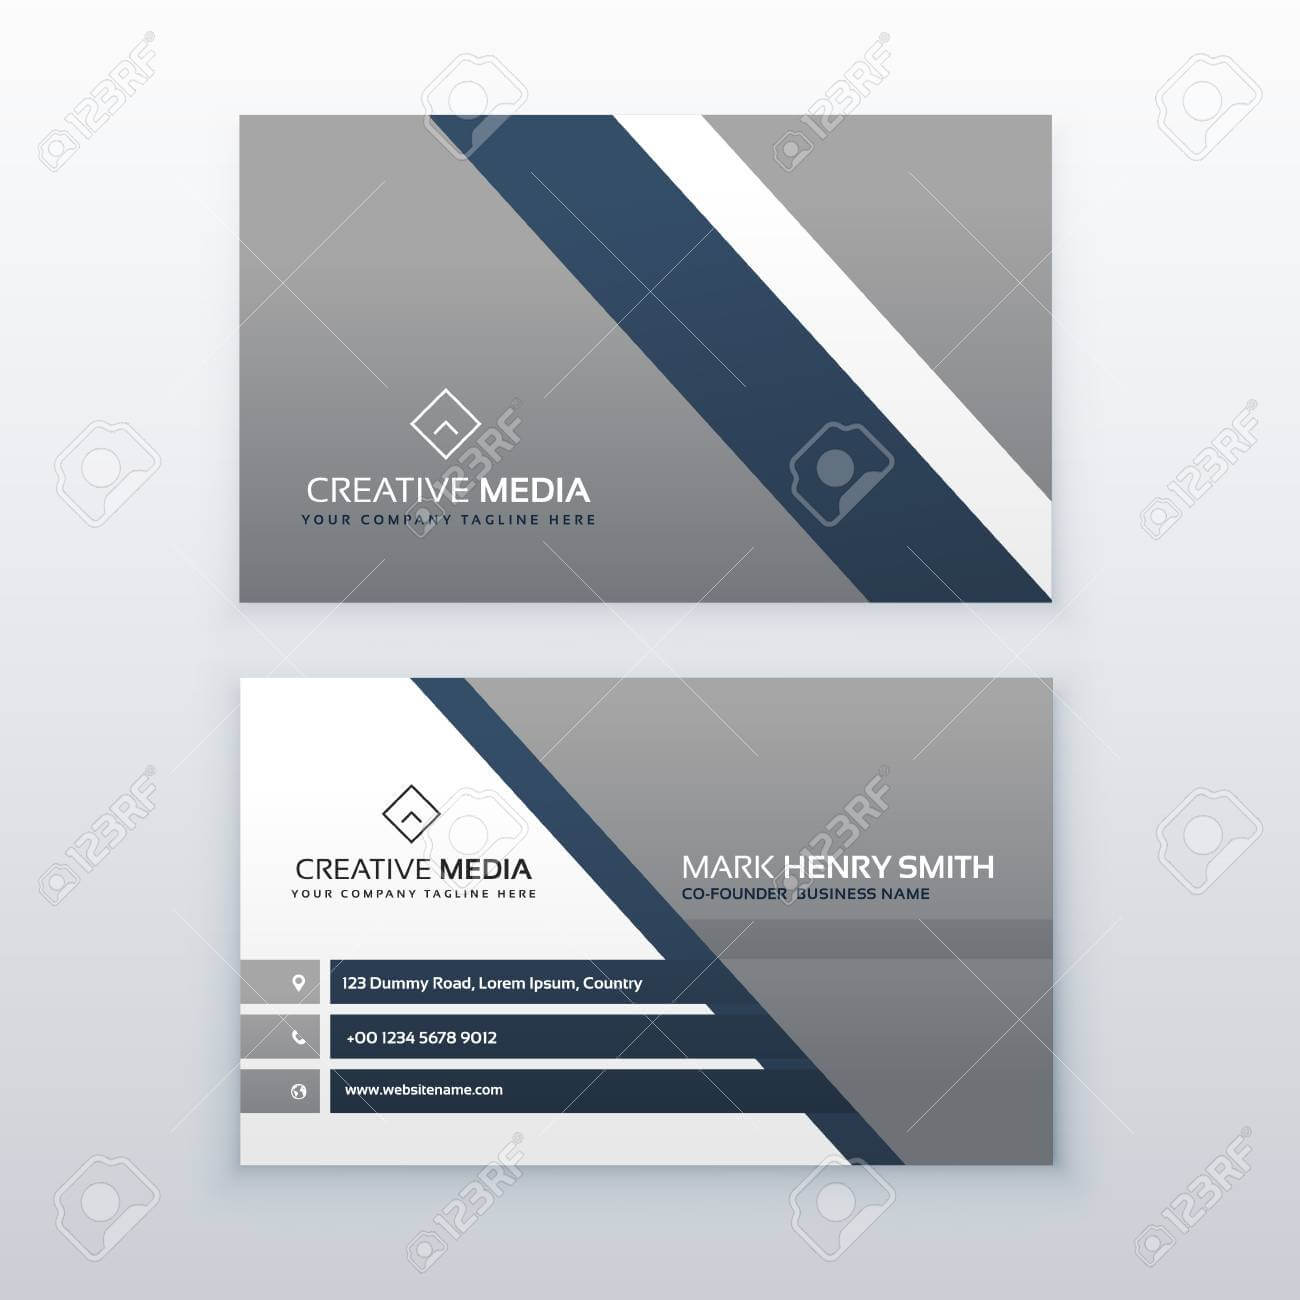 Professional Modern Business Card Creative Template Design Intended For Modern Business Card Design Templates